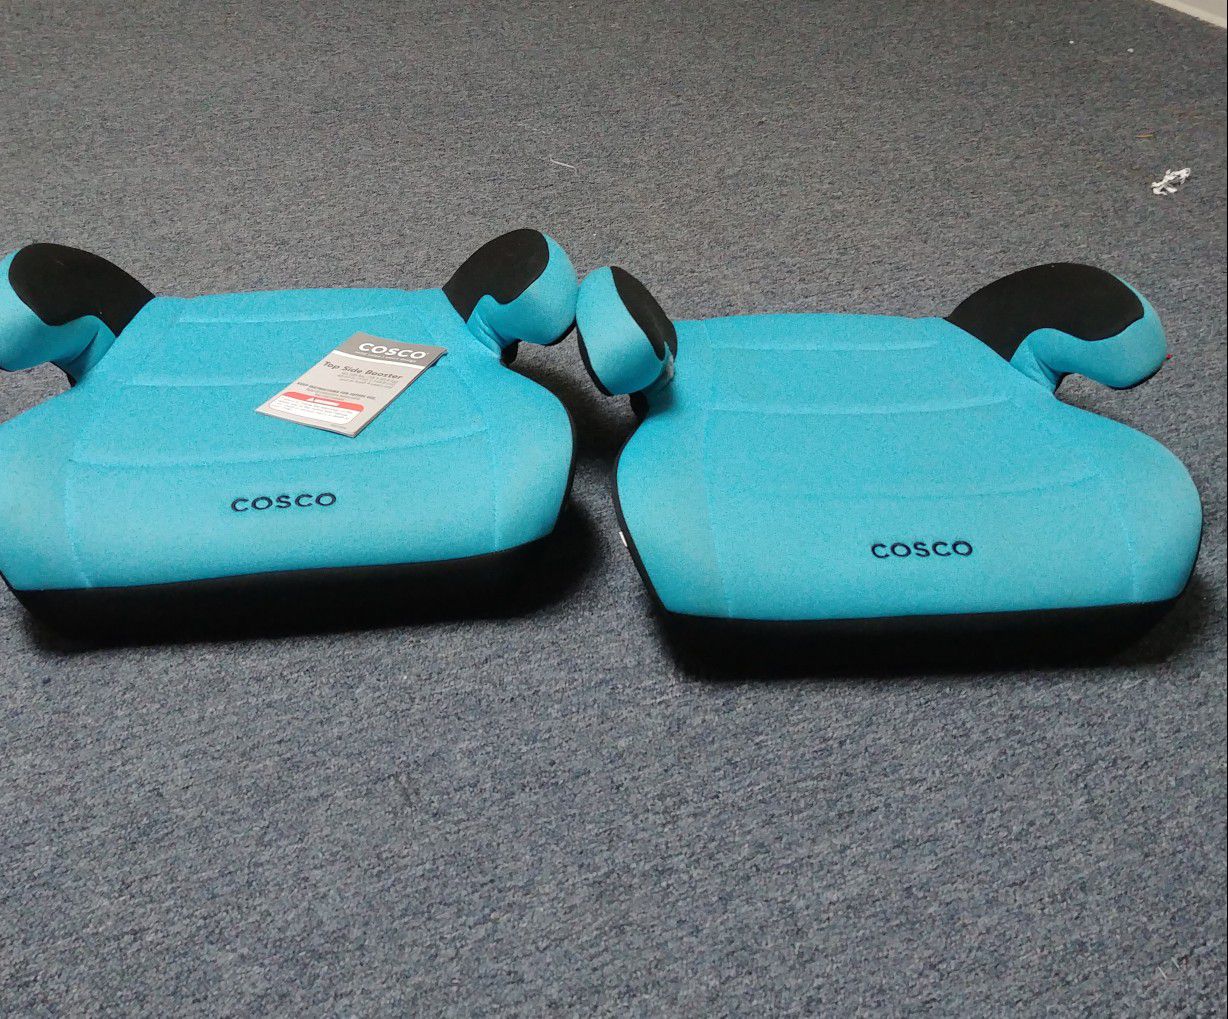 Cosco Booster Seats -2 Available!